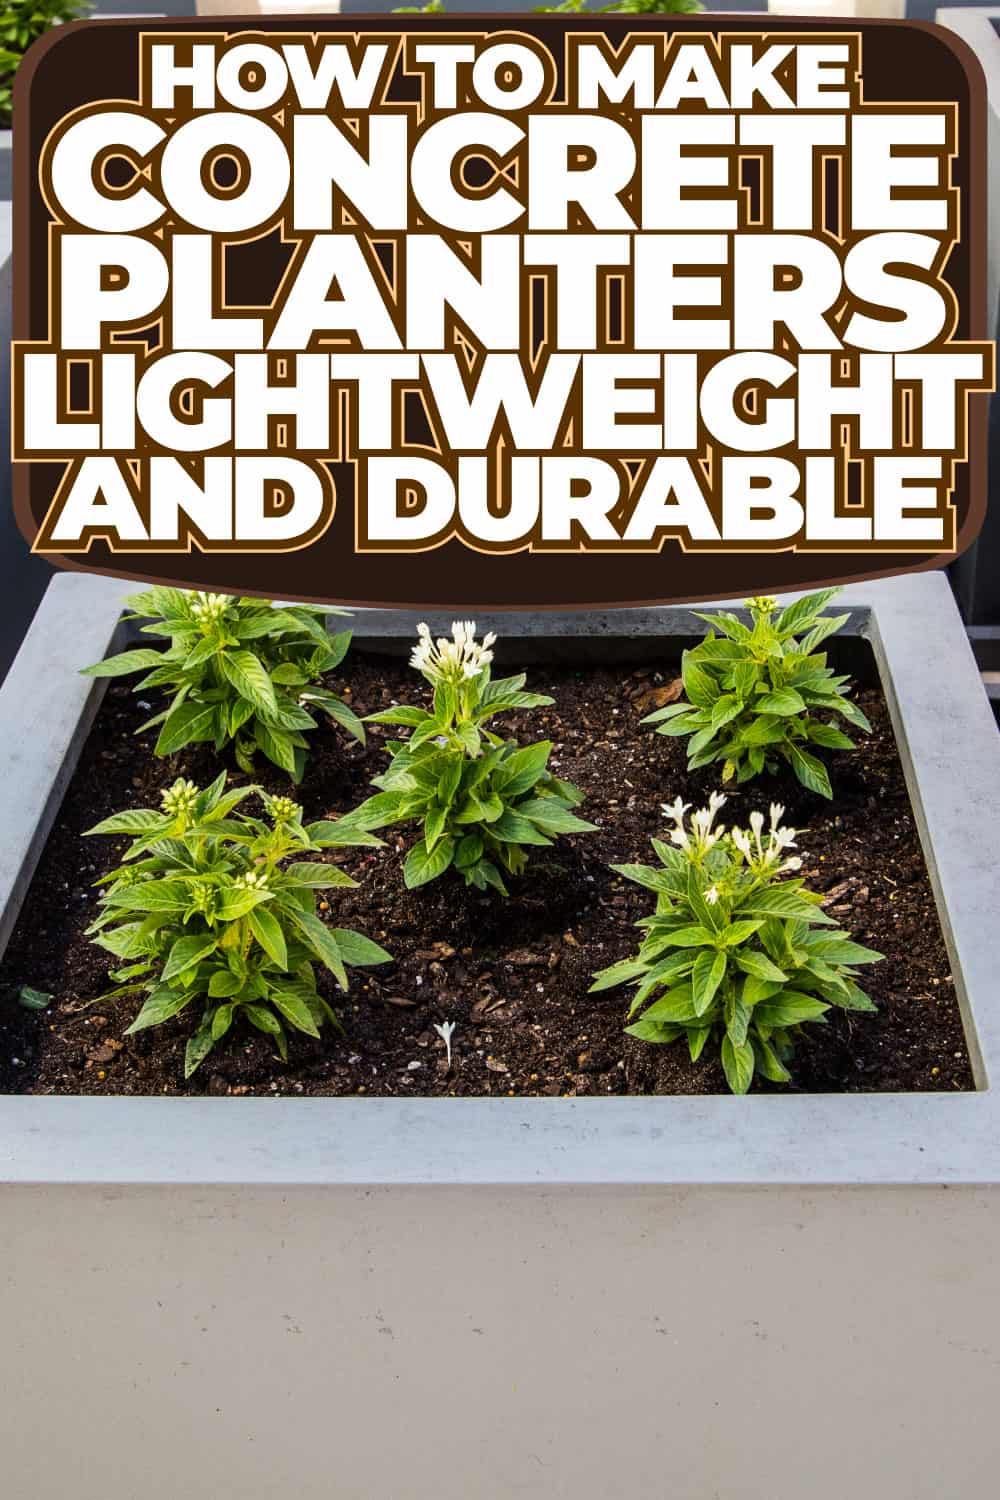 How To Make Concrete Planters Lightweight And Durable